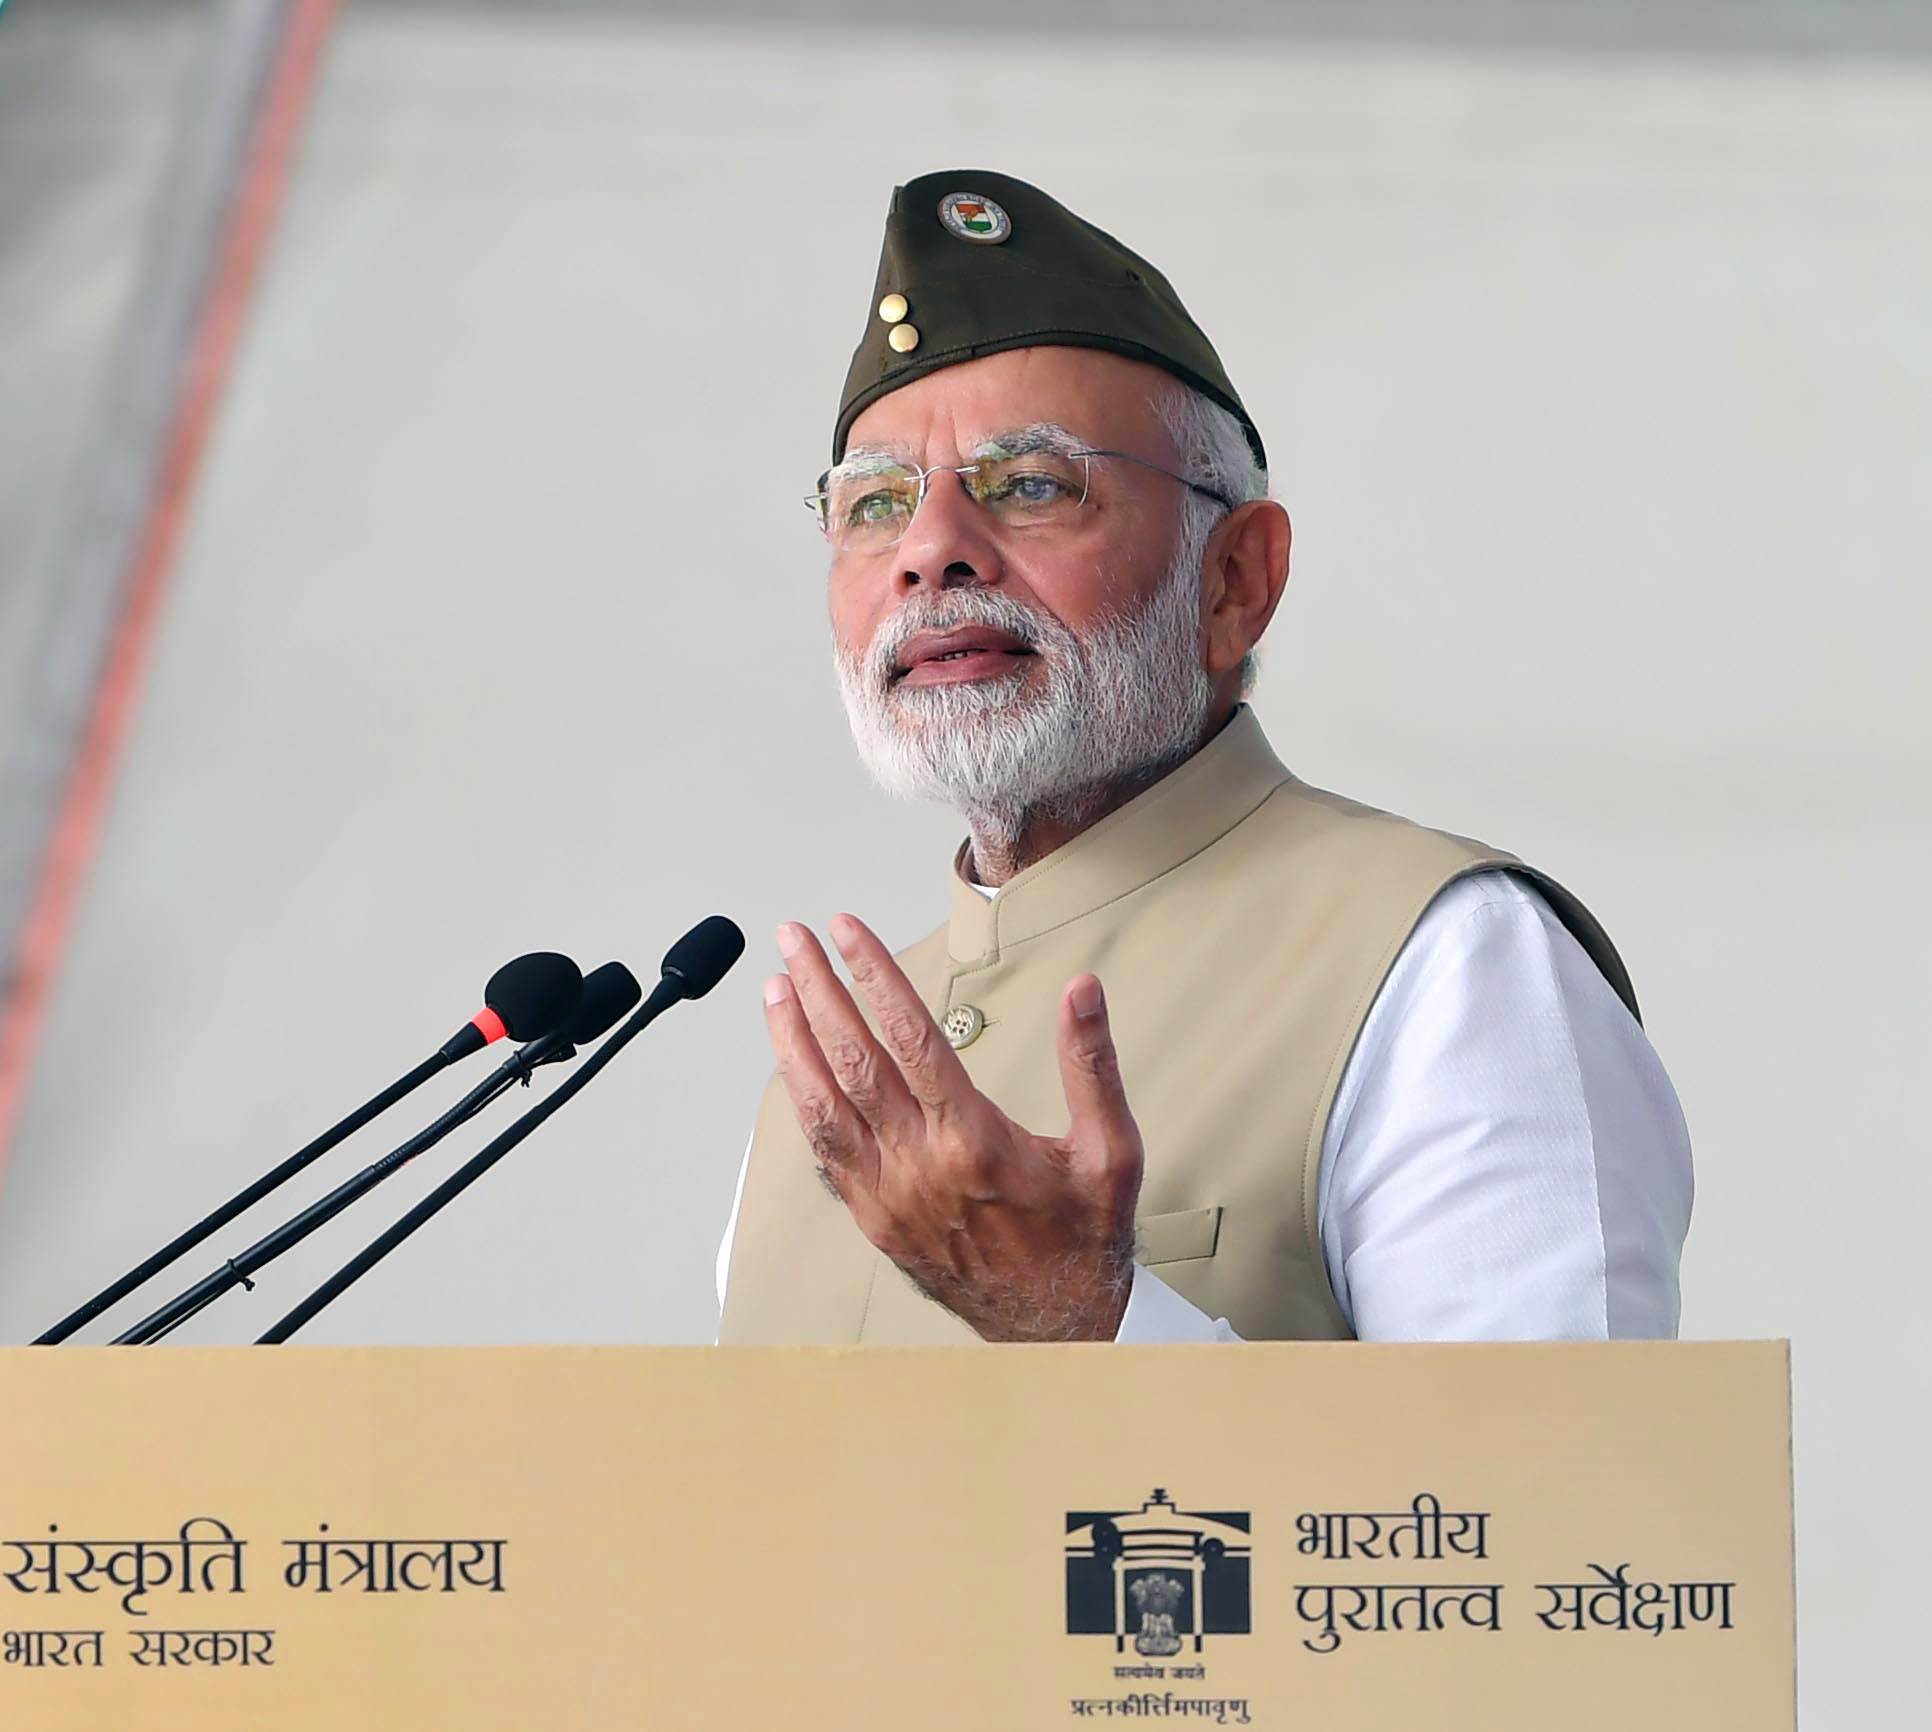 The Prime Minister, Shri Narendra Modi addressing the gathering at a function to commemorate the 75th anniversary formation of the Azad Hind Government, at Red Fort, Delhi on October 21, 2018.